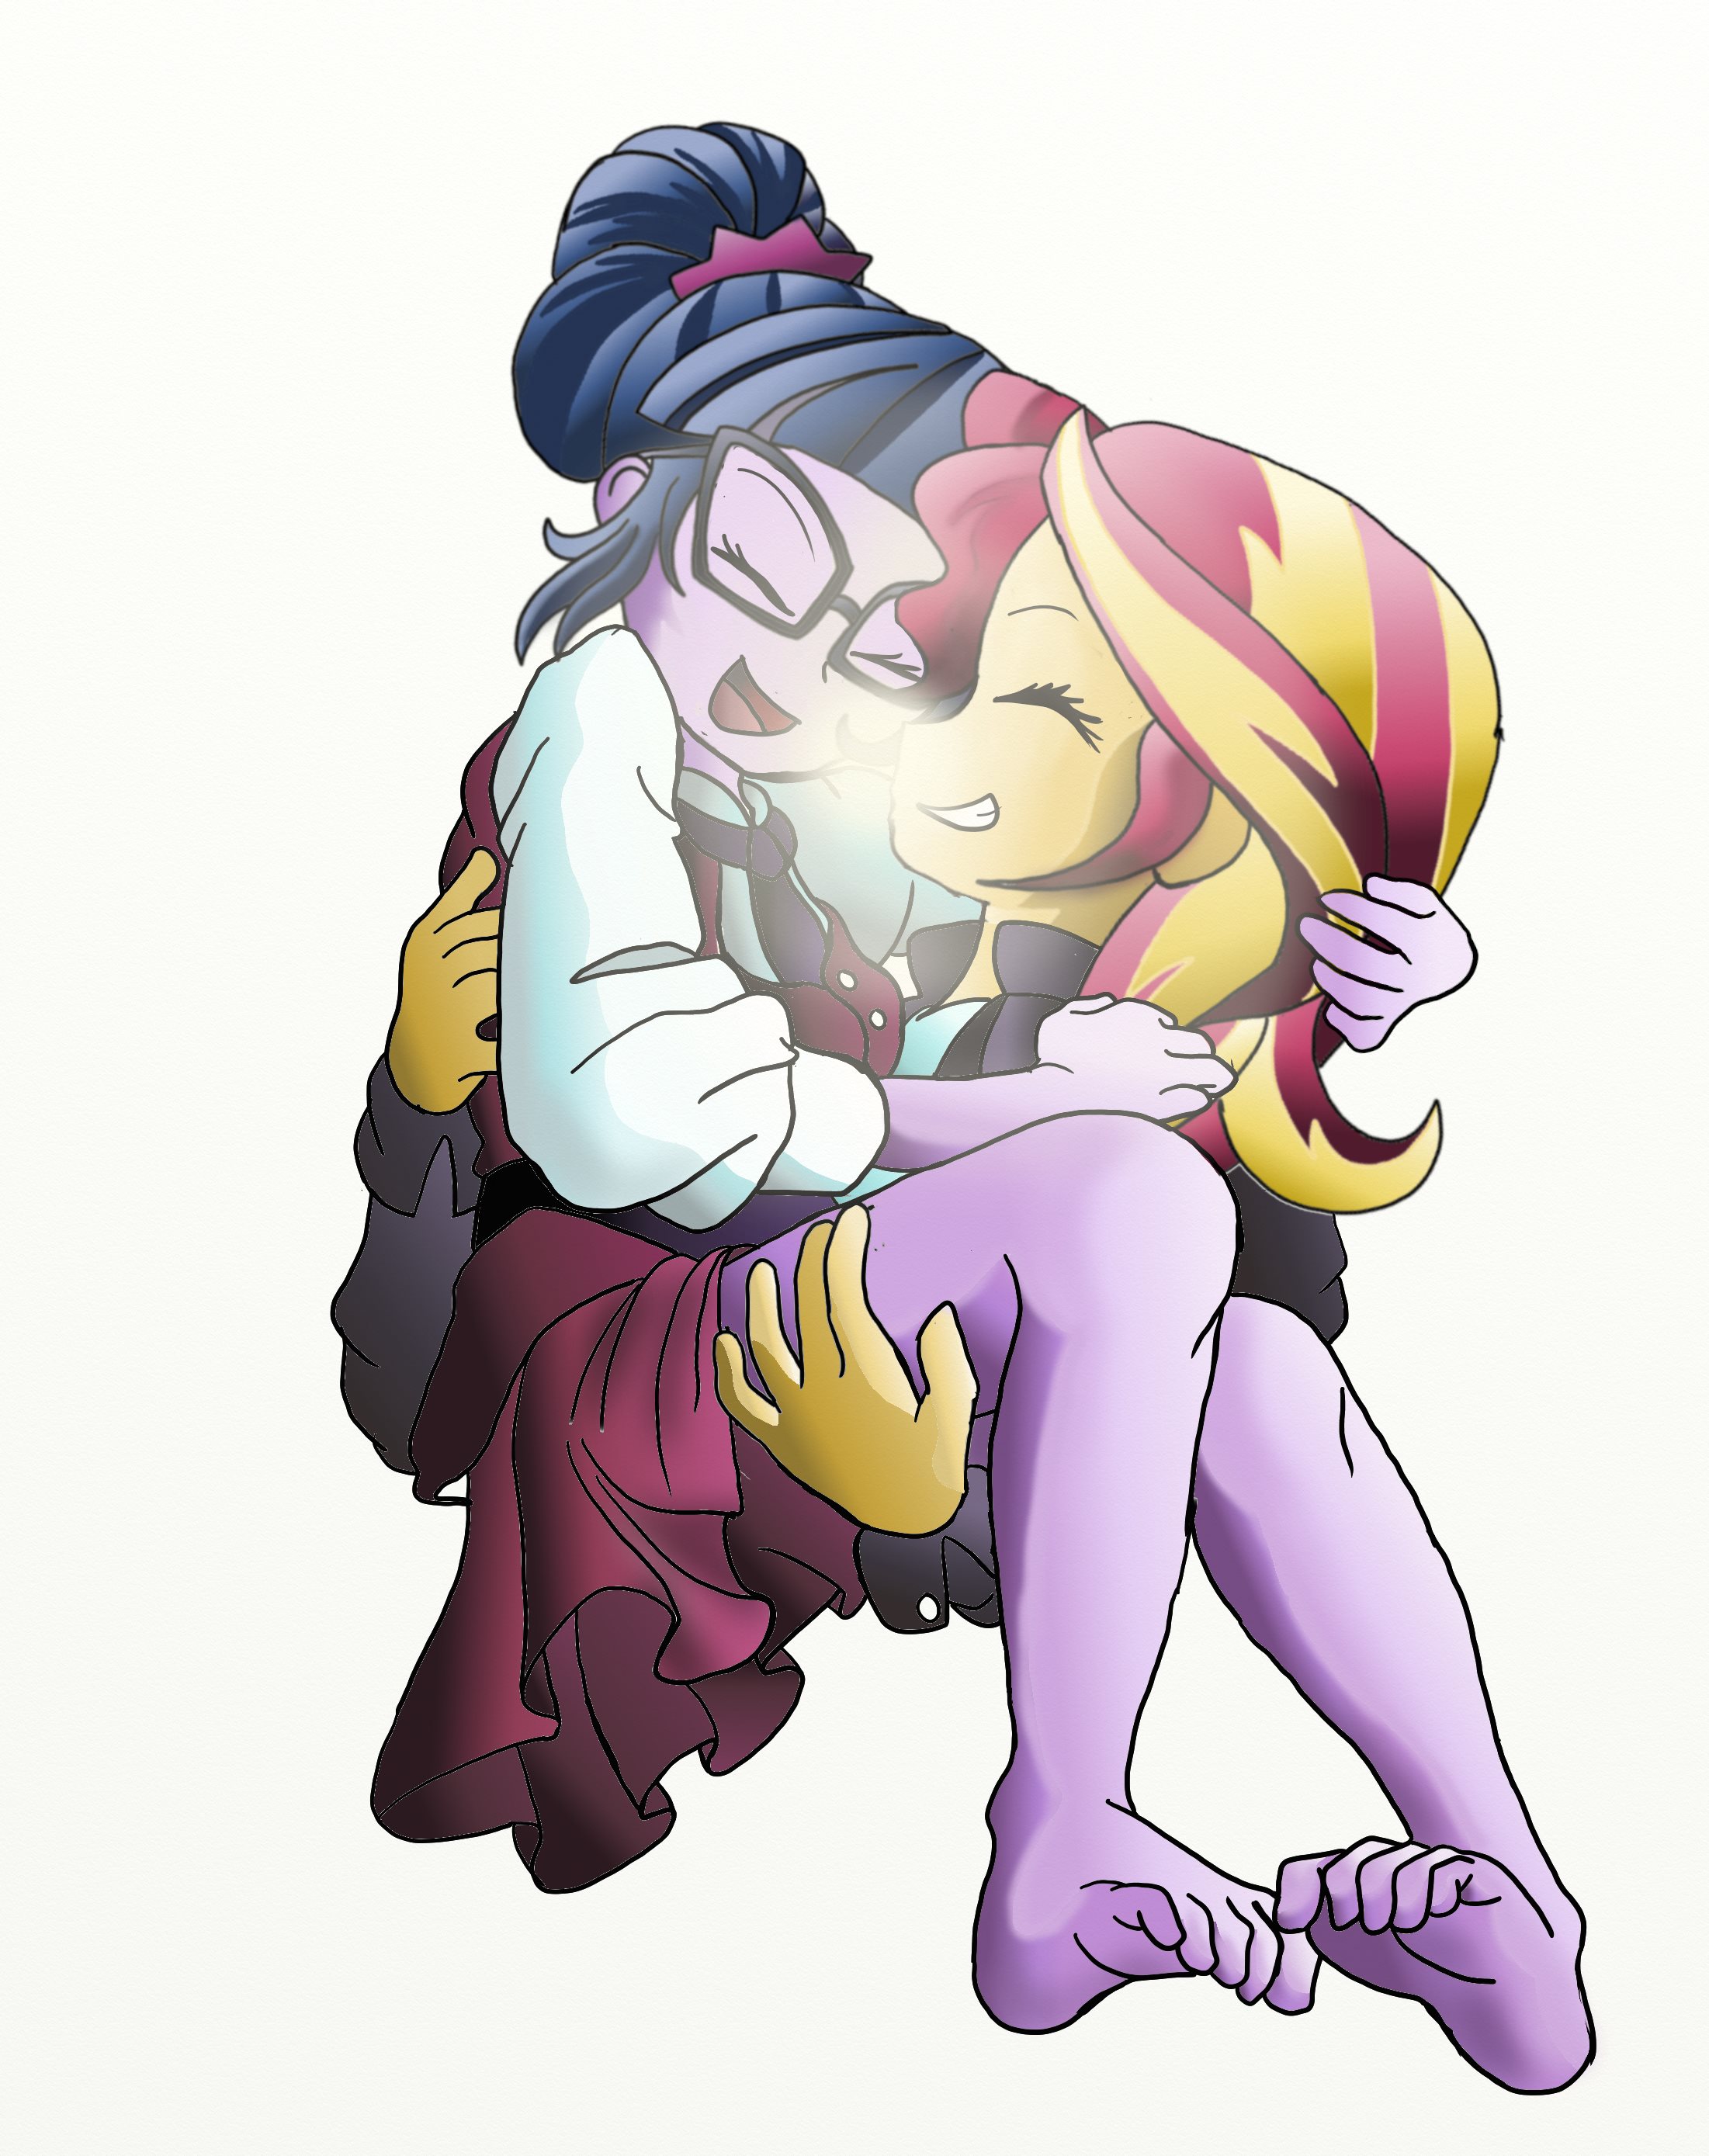 1431155__safe_artist-colon-manifest+harmony_sunset+shimmer_twilight+sparkle_equestria+girls_bridal+carry_carrying_cute_fanfic-colon-clocktower+society_.jpeg